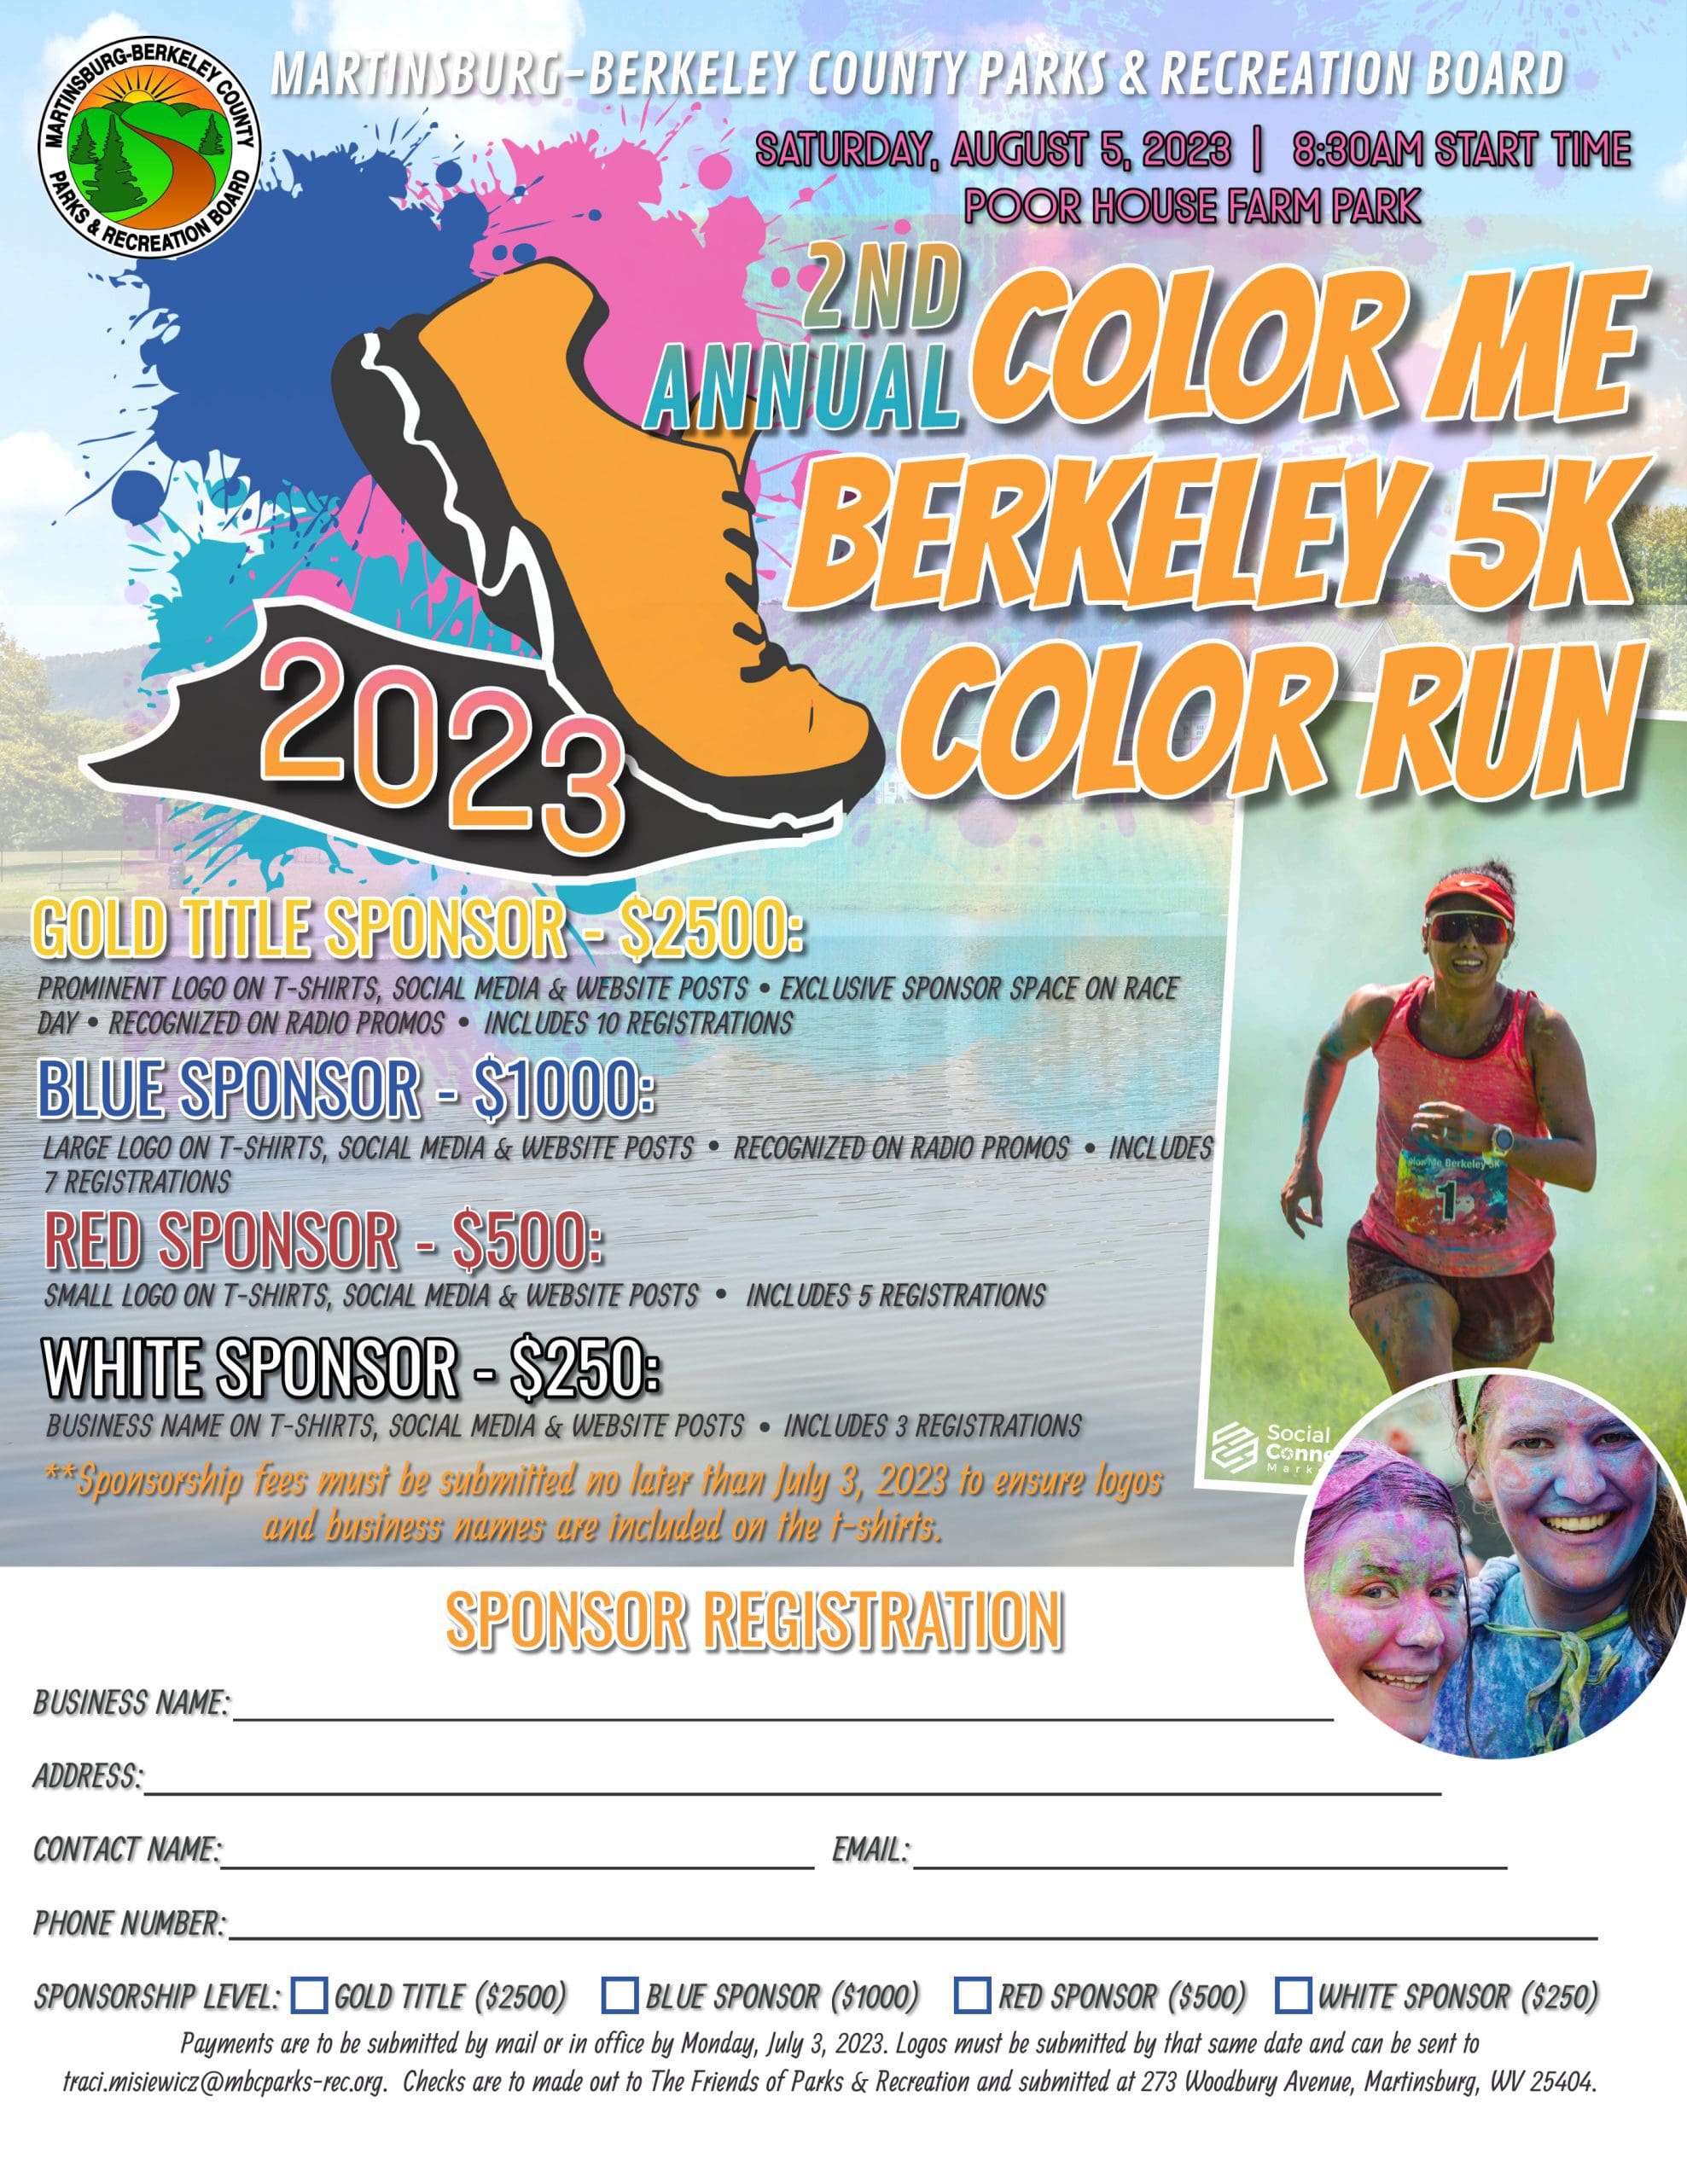 2nd Annual Color Run at Poor House Farm Park